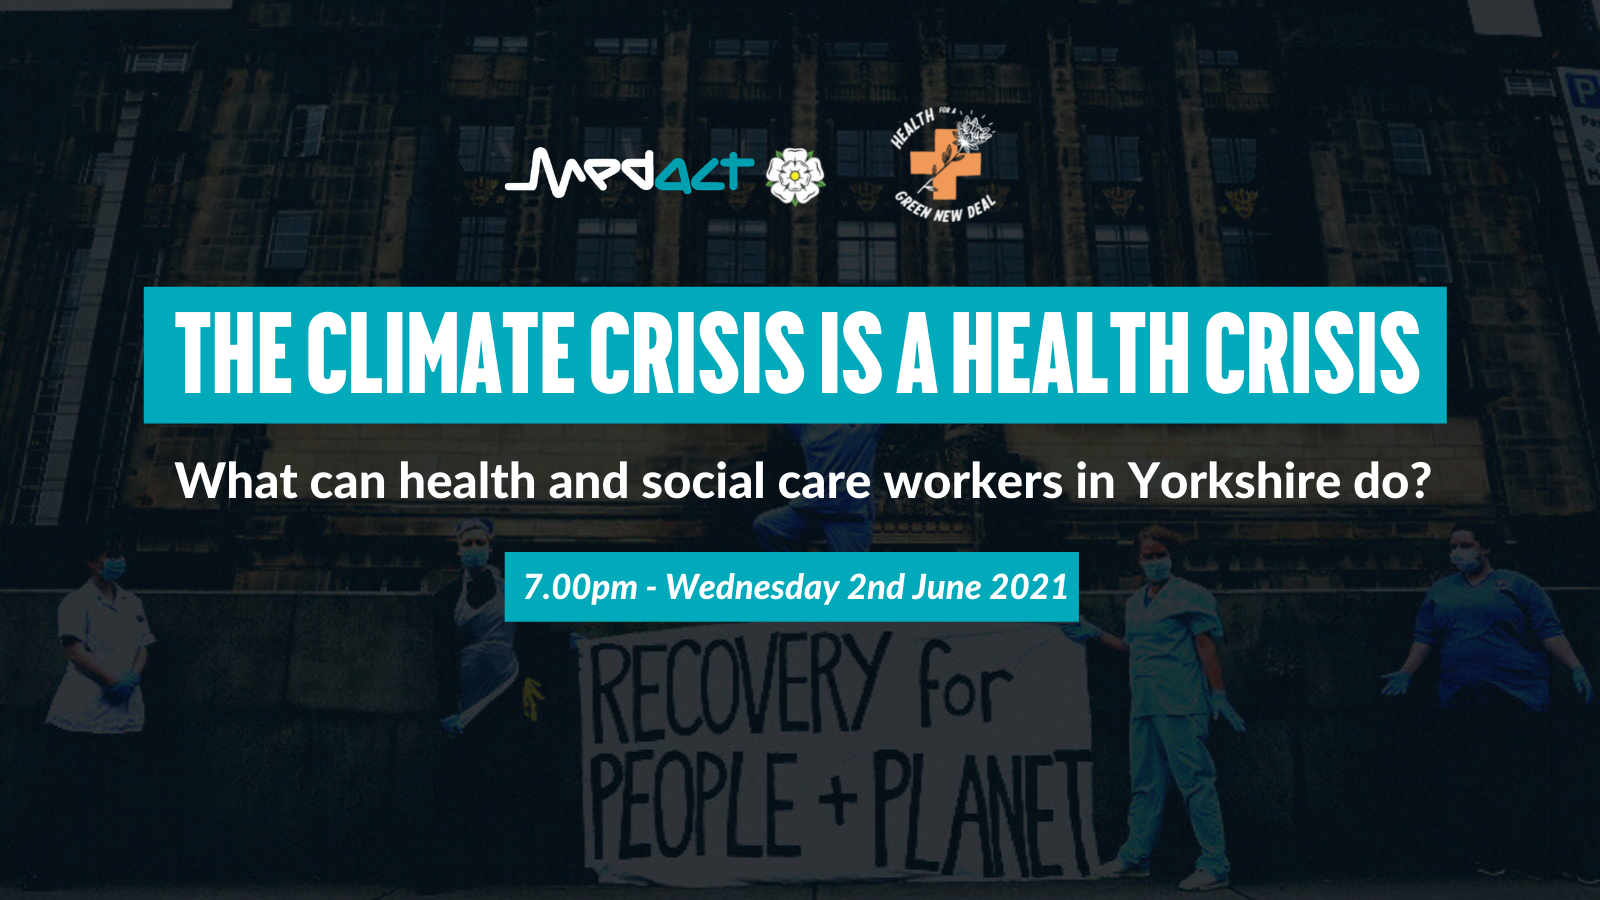 THE CLIMATE CRISIS IS A HEALTH CRISIS - What can health and social care workers in Yorkshire do? 7pm - Wednesday 2nd June 2021 - Medact Yorkshire & Health for a Green New Deal (over faded image of health workers with banner saying RECOVERY for PEOPLE + PLANET)